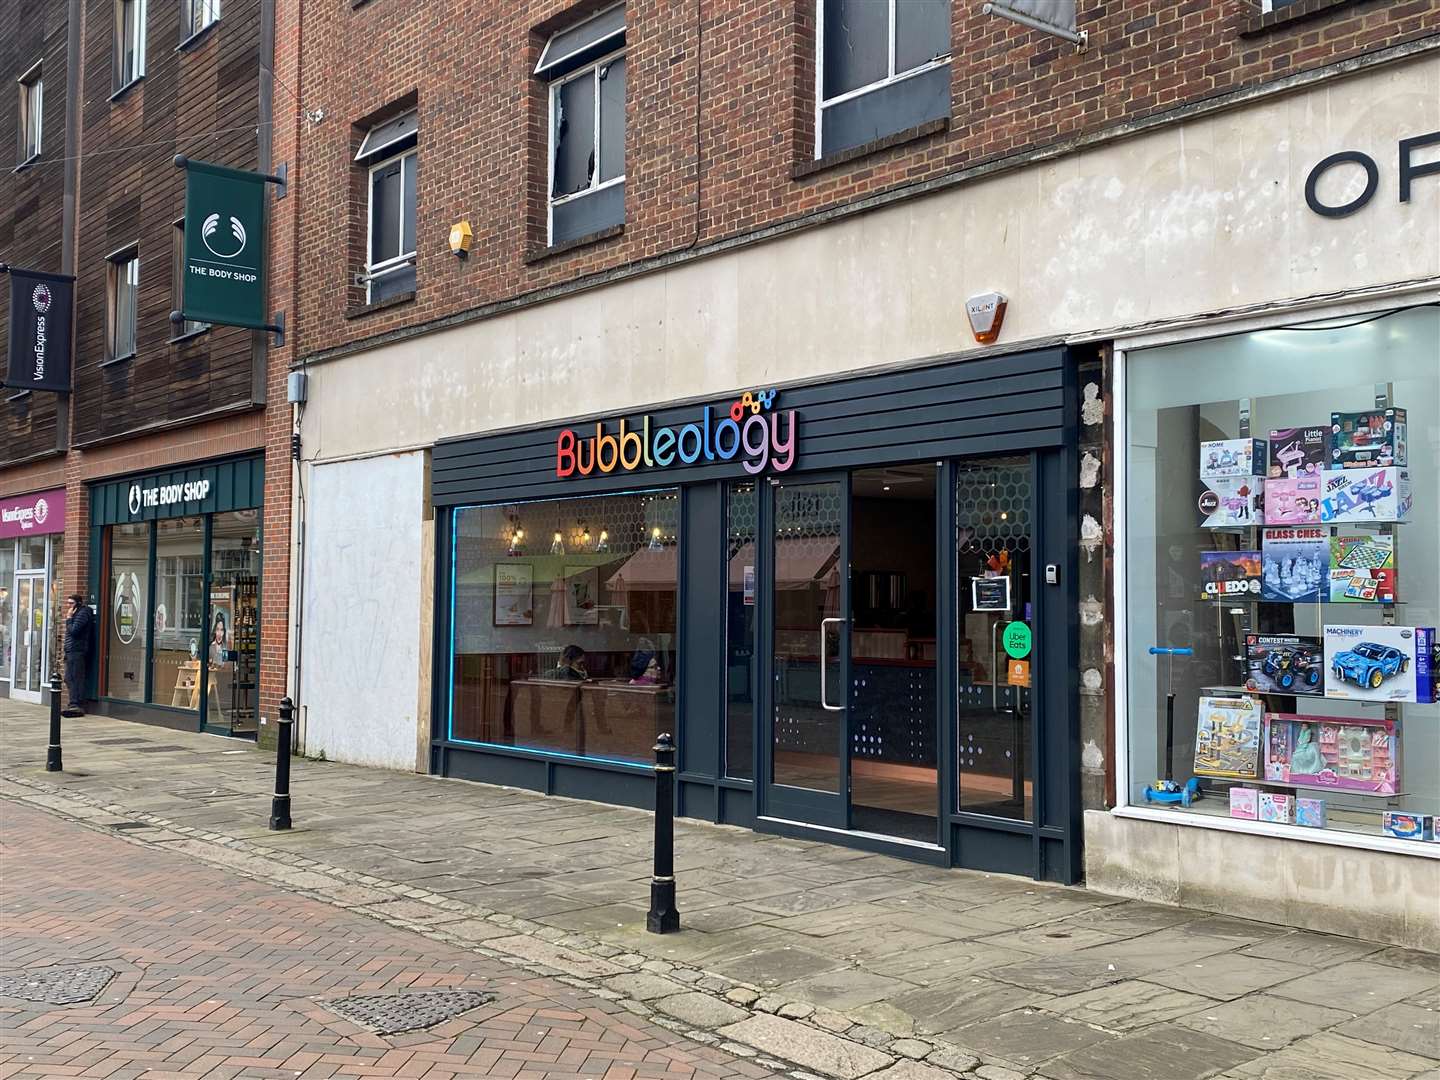 Bubbleology also opened in Canterbury in the last six months